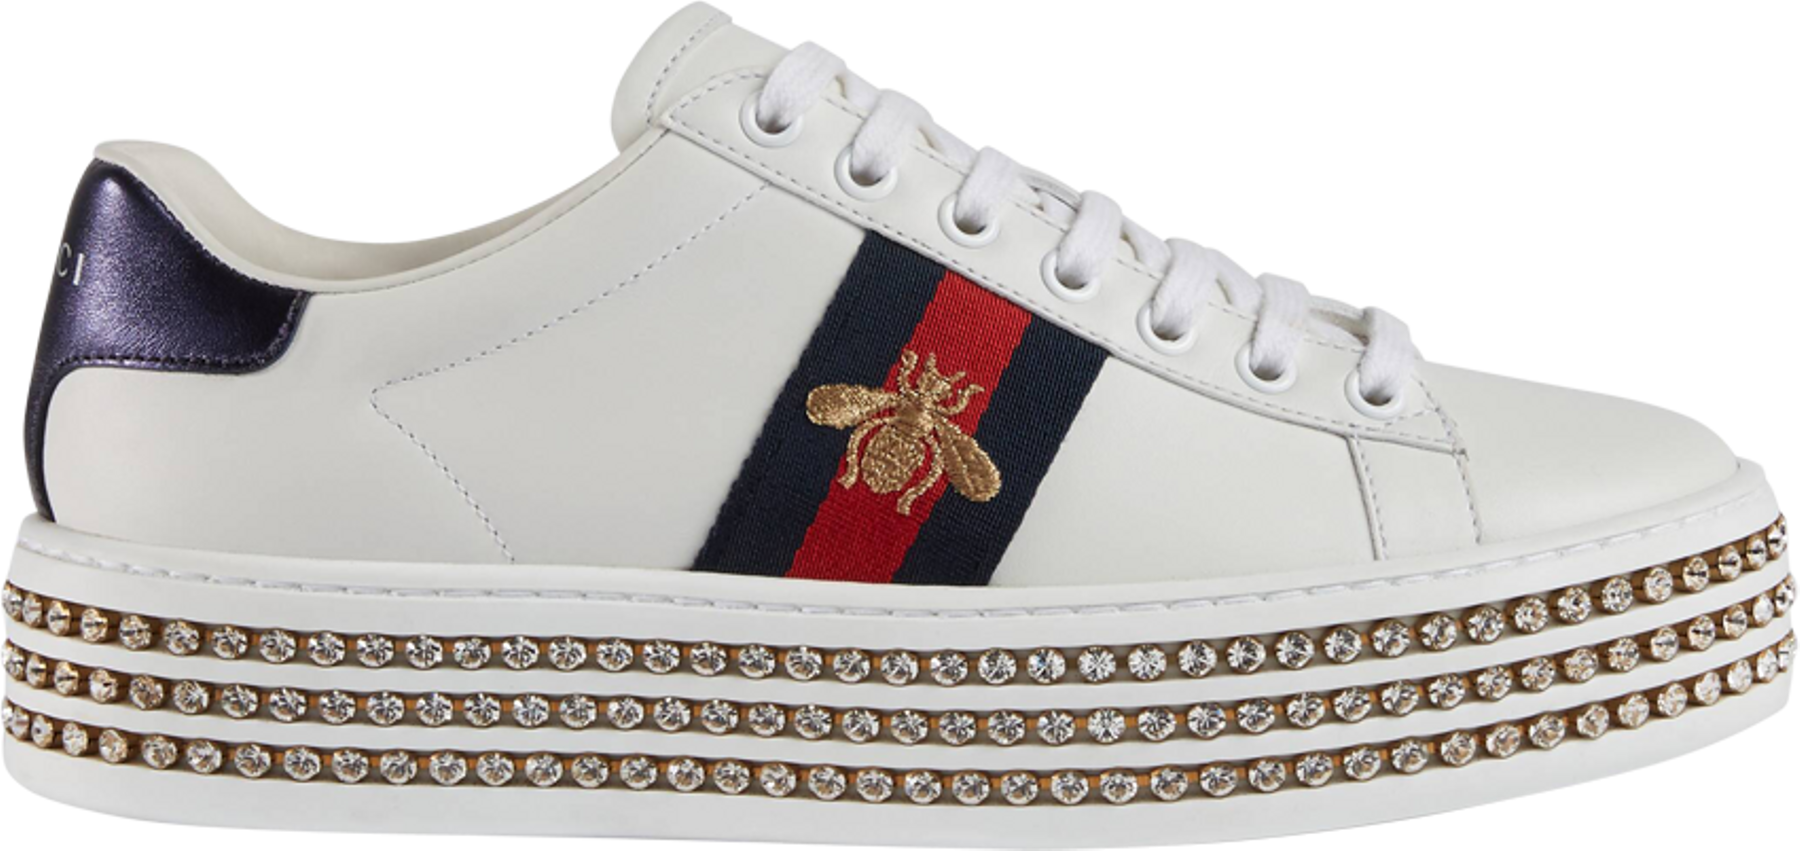 Gucci Wmns Ace 'Crystal' | GOAT